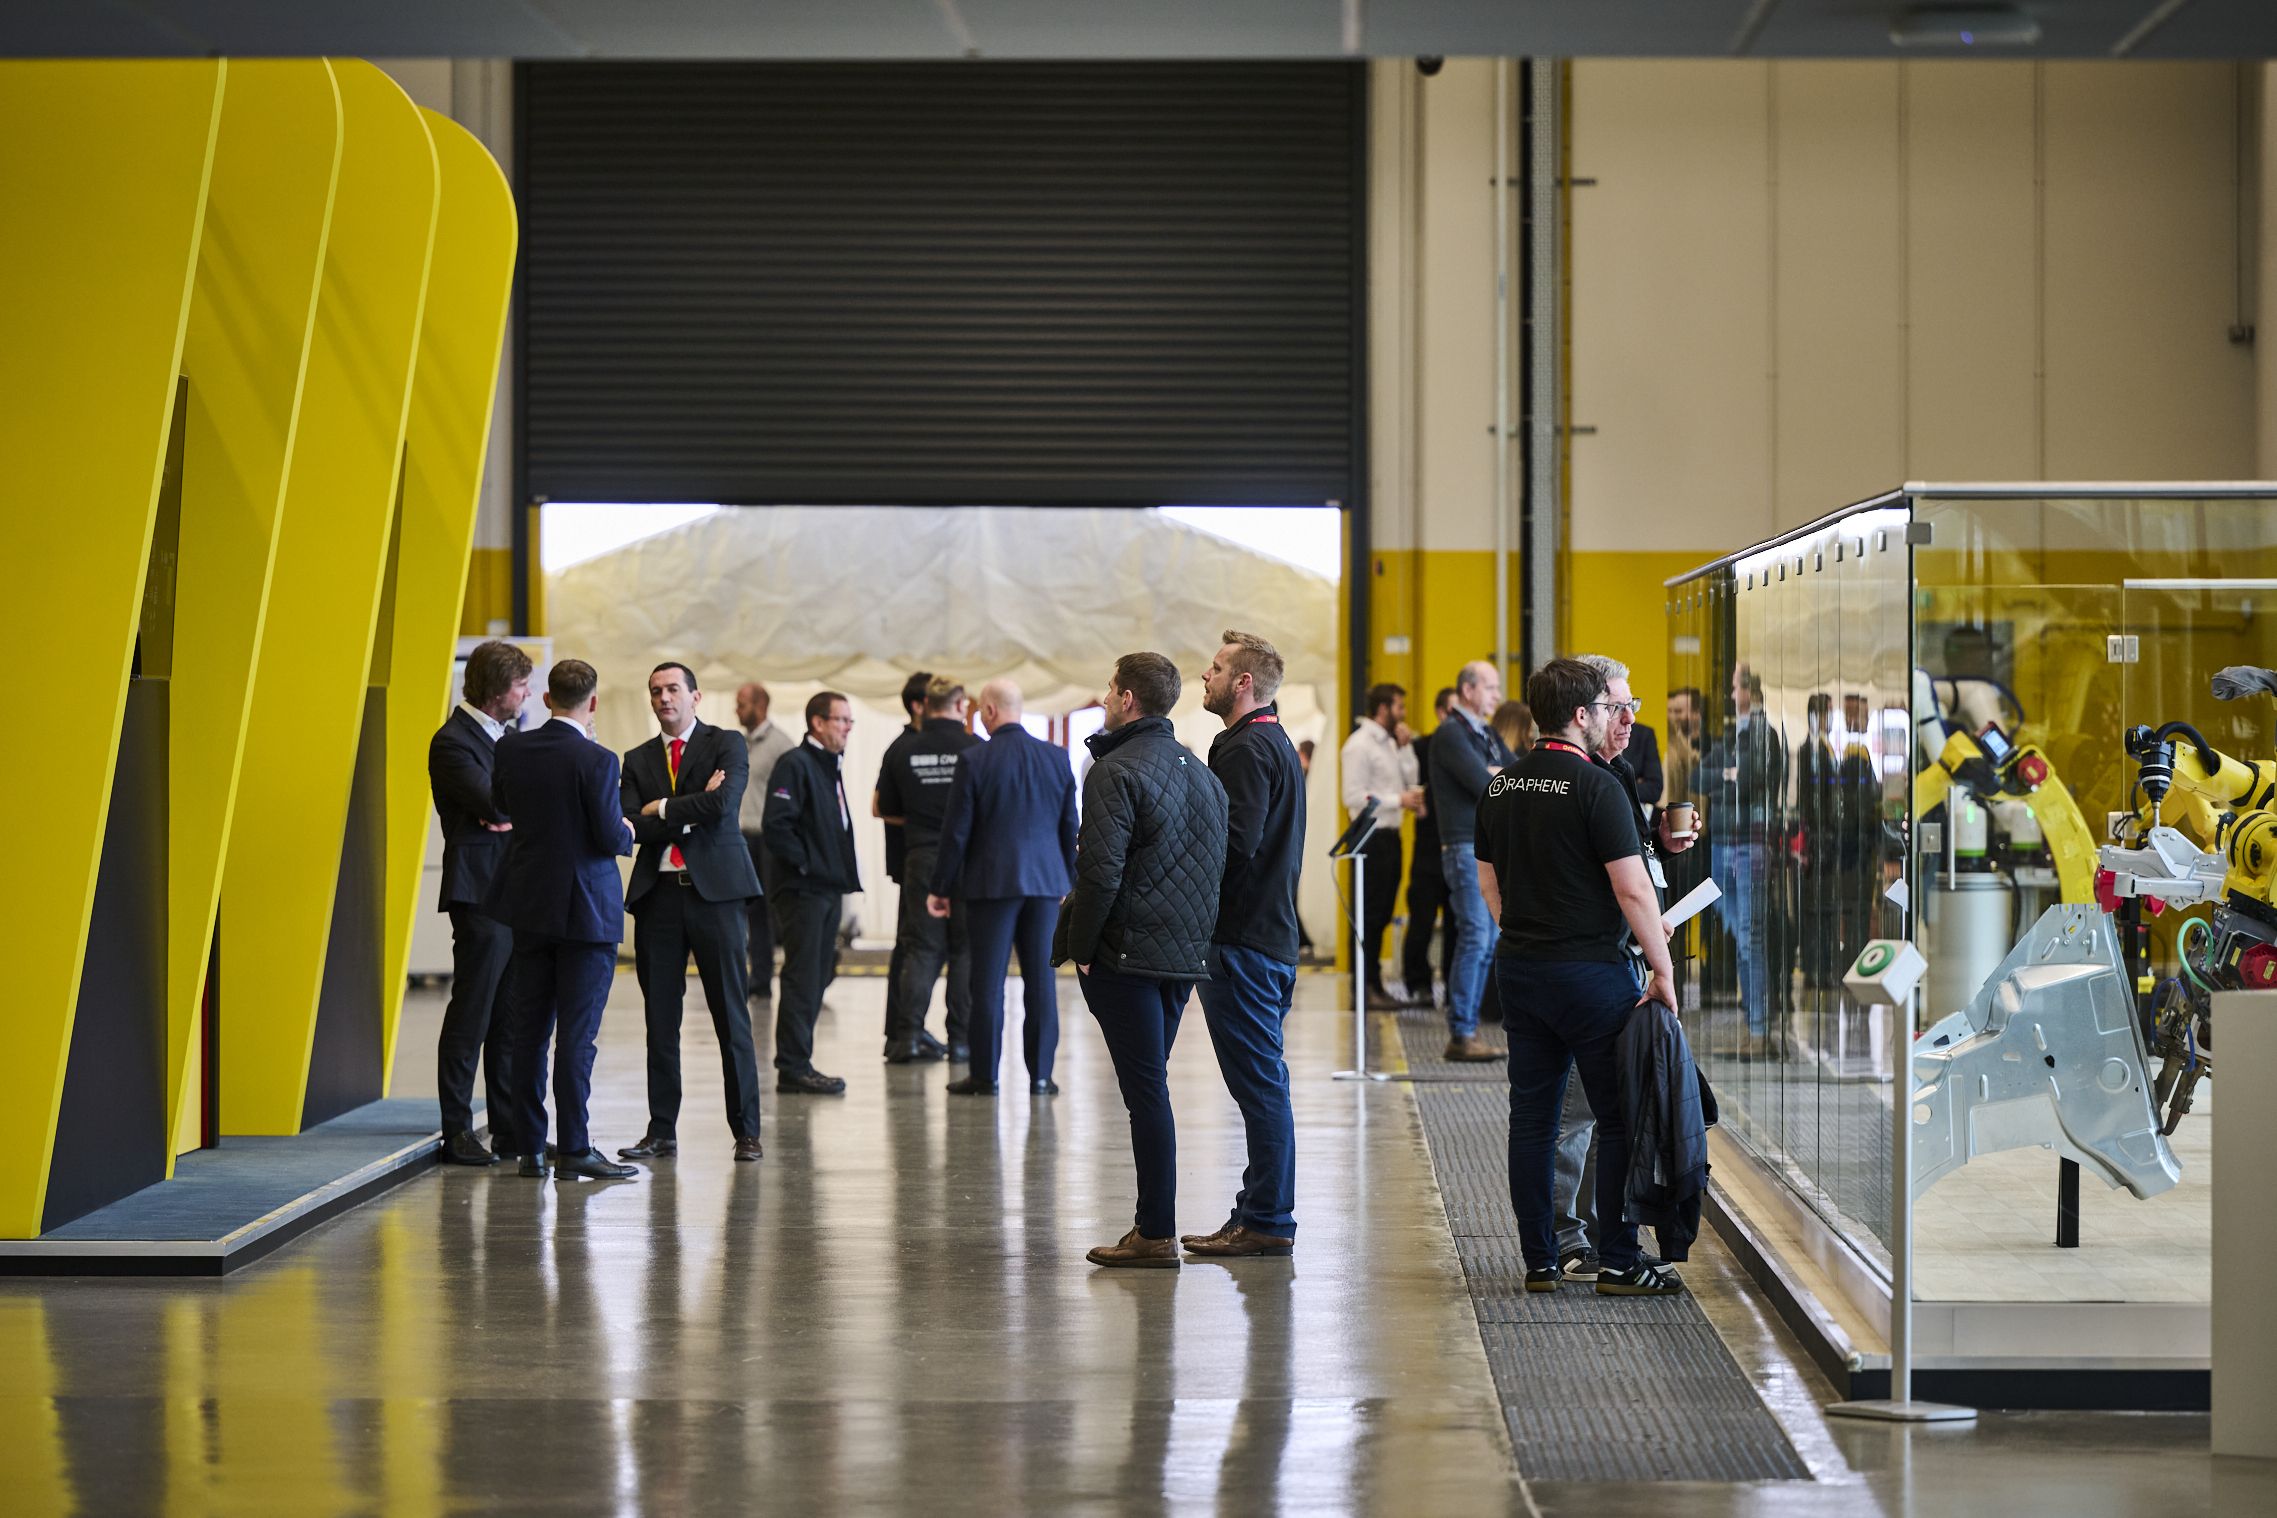 Experience the future of manufacturing at FANUC’s Open House